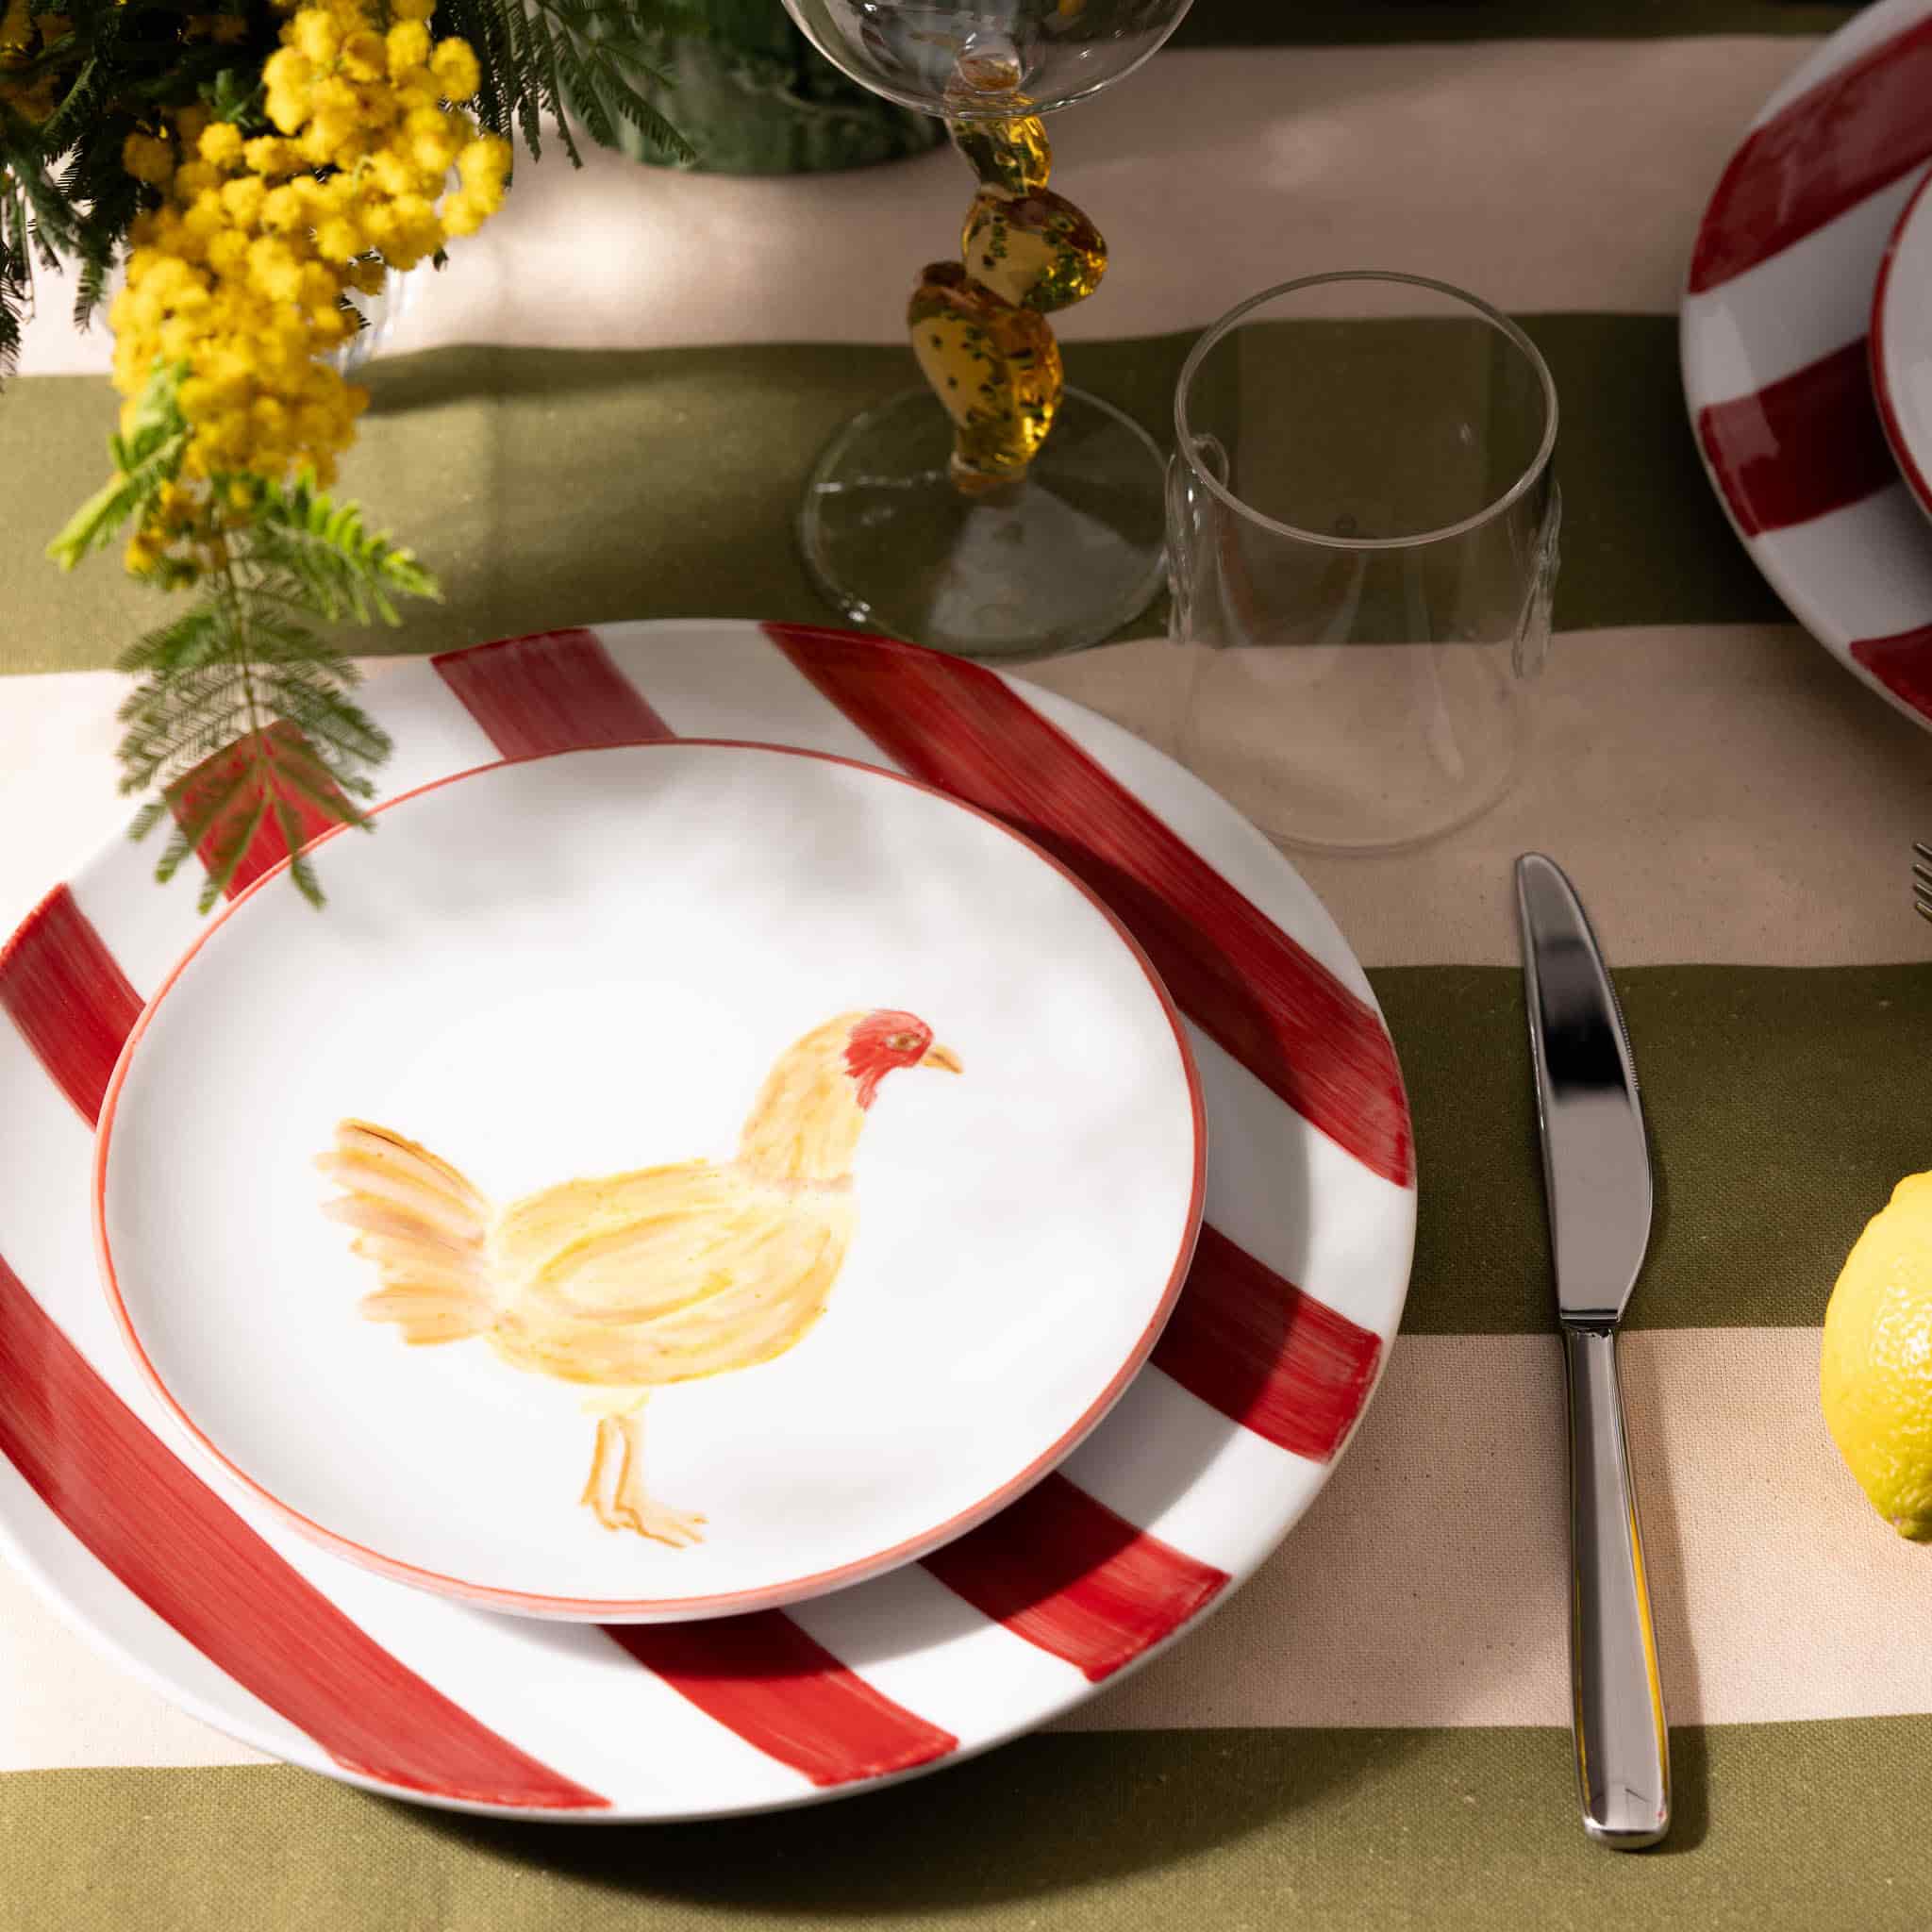 The Platera Menchu Chicken Porcelain Side Plate, 21cm